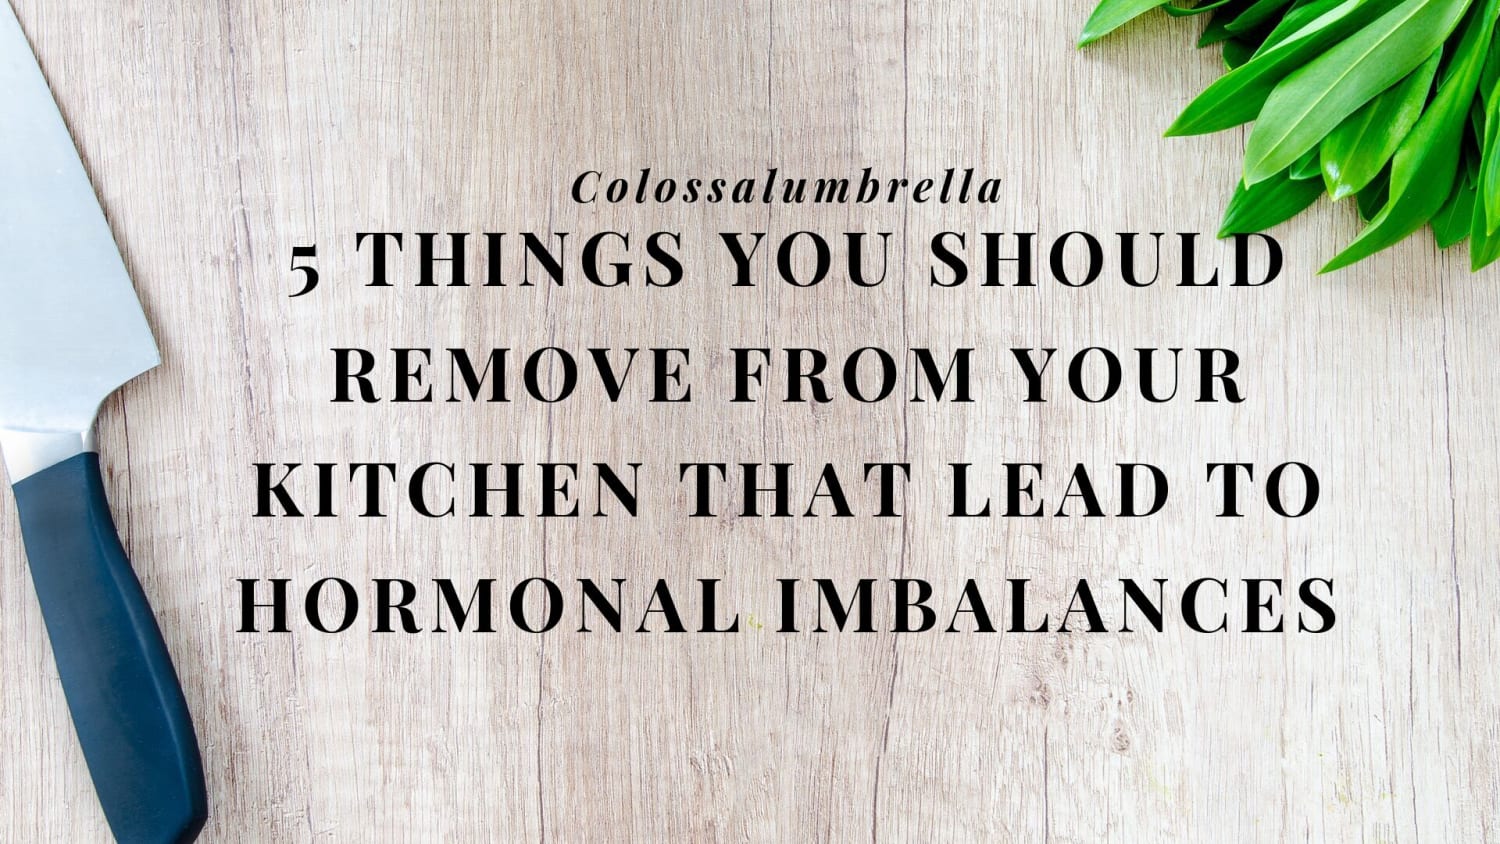 5 simple things in your kitchen that lead to hormonal imbalances